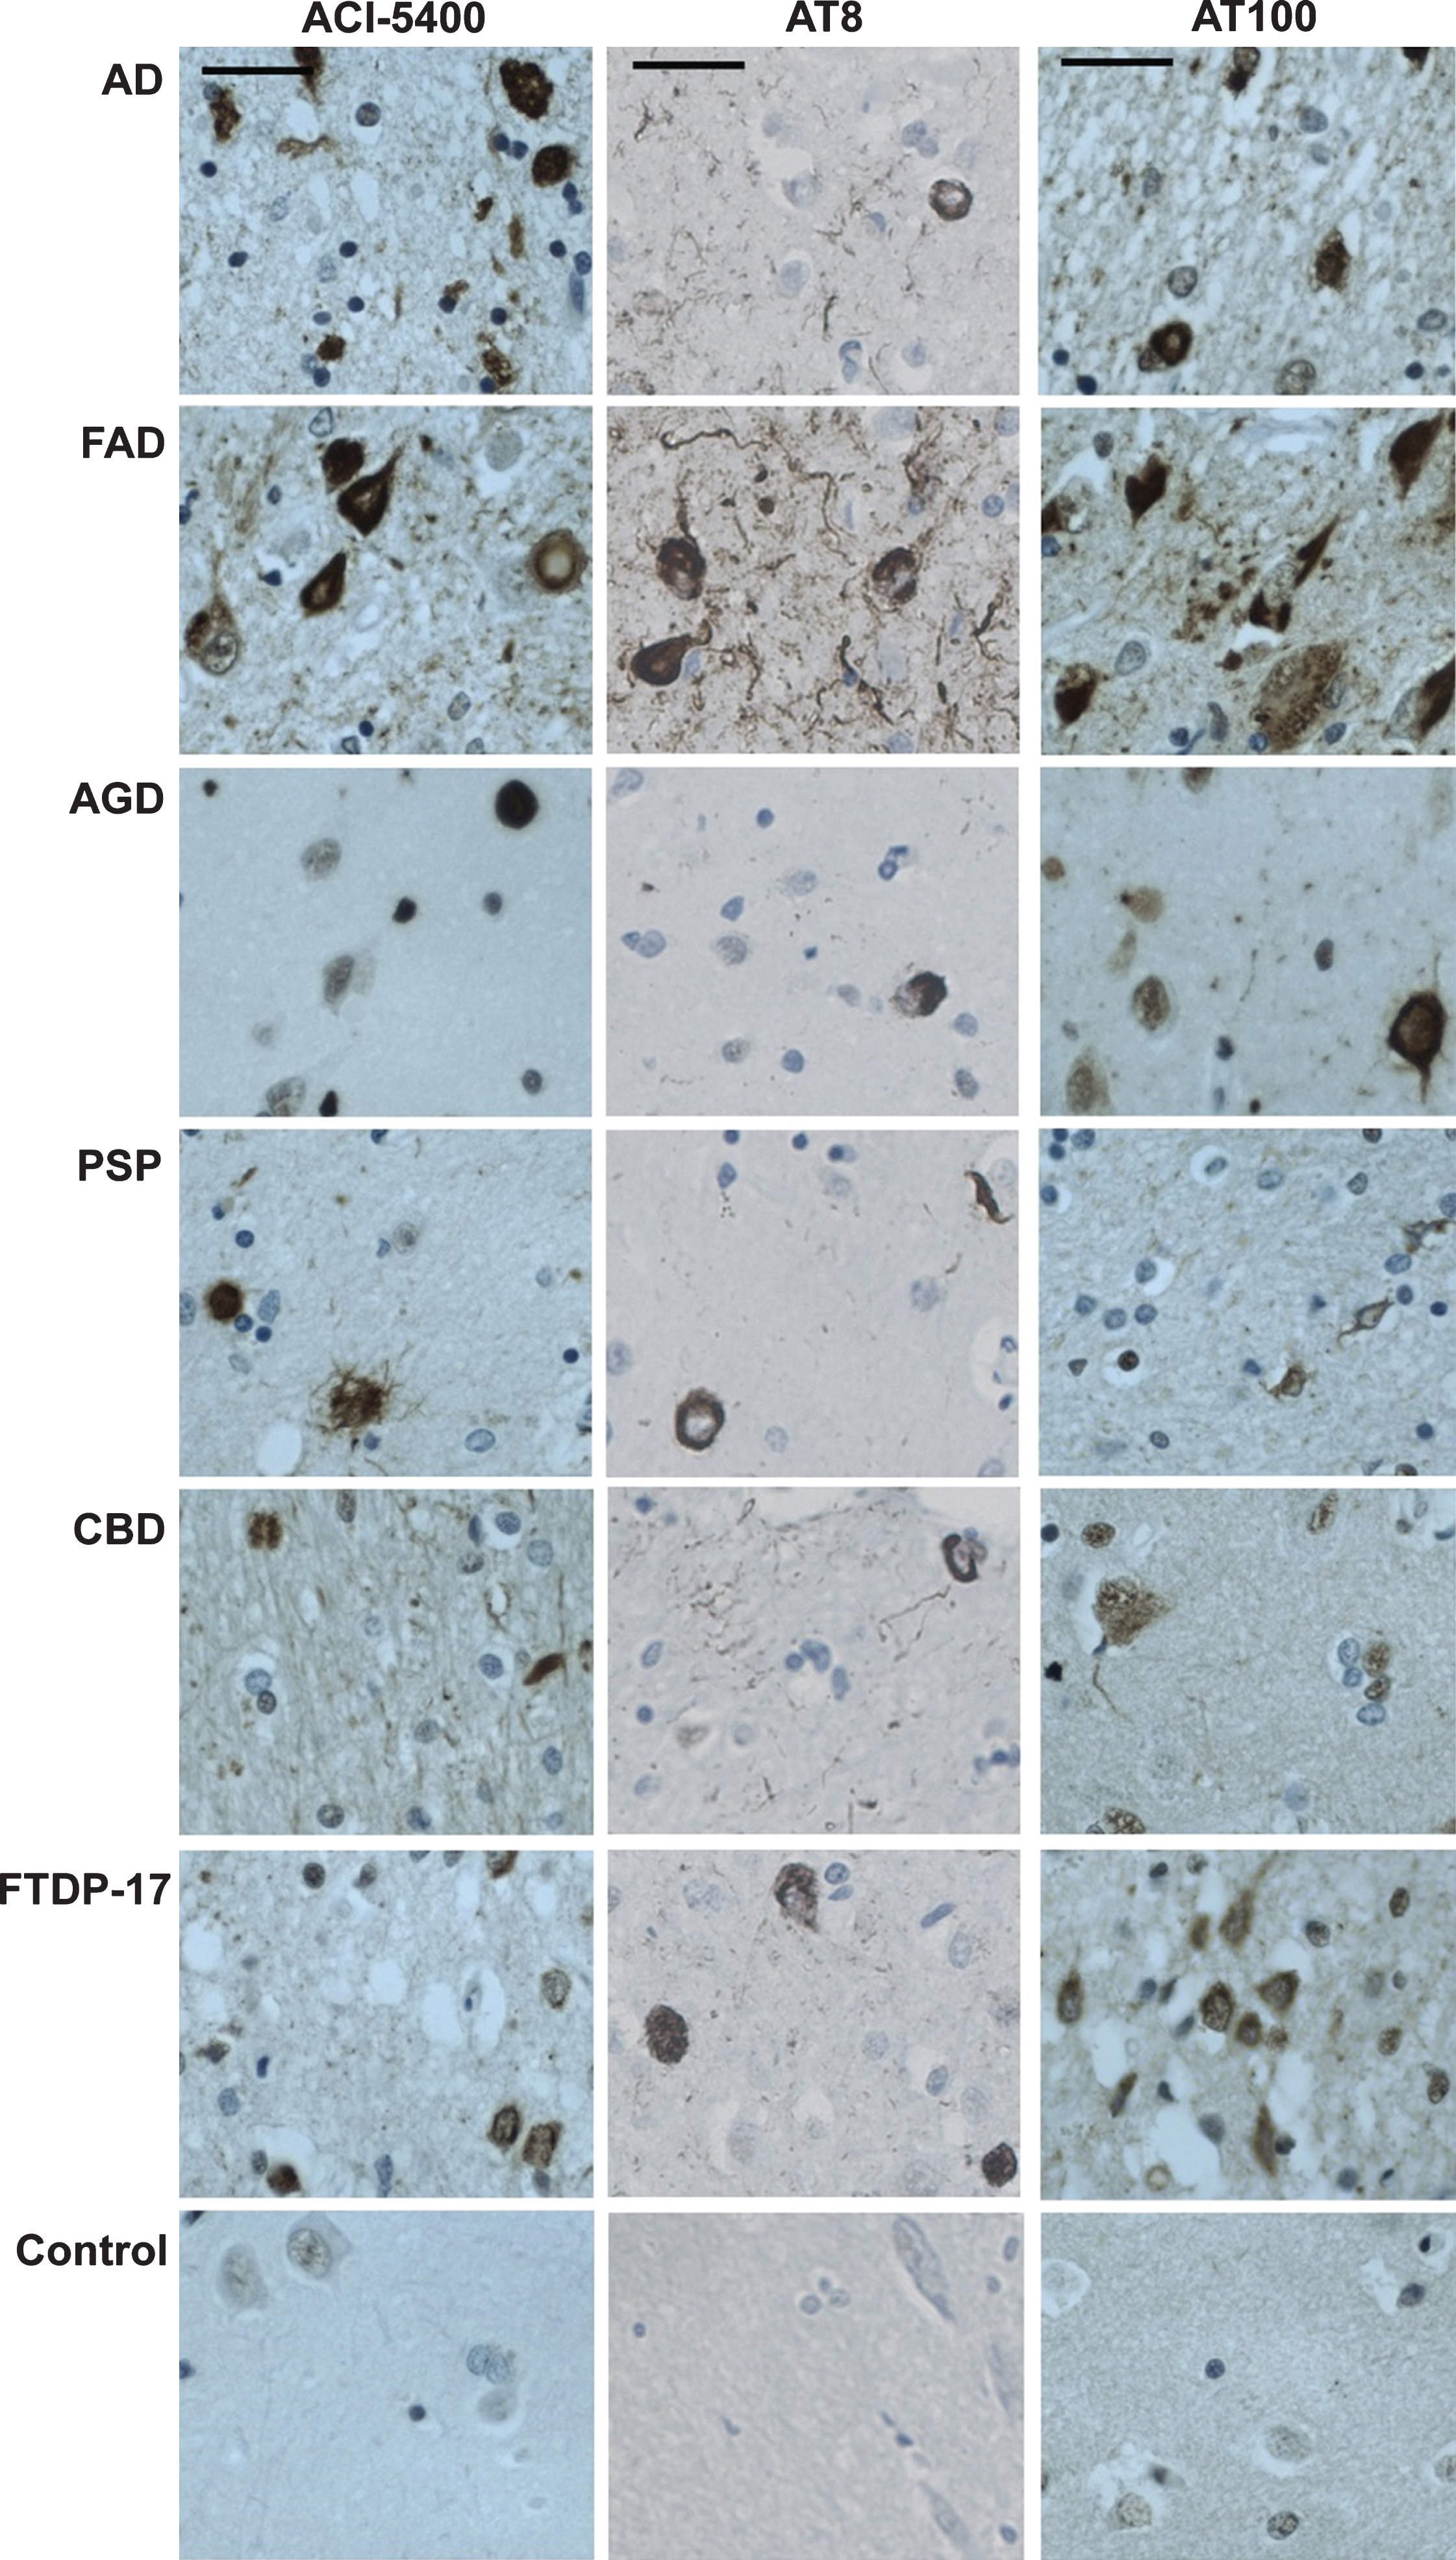 ACI-5400 specifically detects Tau pathology in clinically different tauopathies. IHC with ACI-5400 revealed aggregated Tau inclusions specific for the different tauopathies (left column), denoted by standard abbreviations in the captions on the left (n = 1). Parallel analysis with Mabs AT8 (central column) and AT100 (right column) were done as positive controls. The following antibody dilutions were used: ACI-5400 at 1/3’000, AT8 at 1/3’000, and AT100 at 1/100. Scale bars = 40 μm.